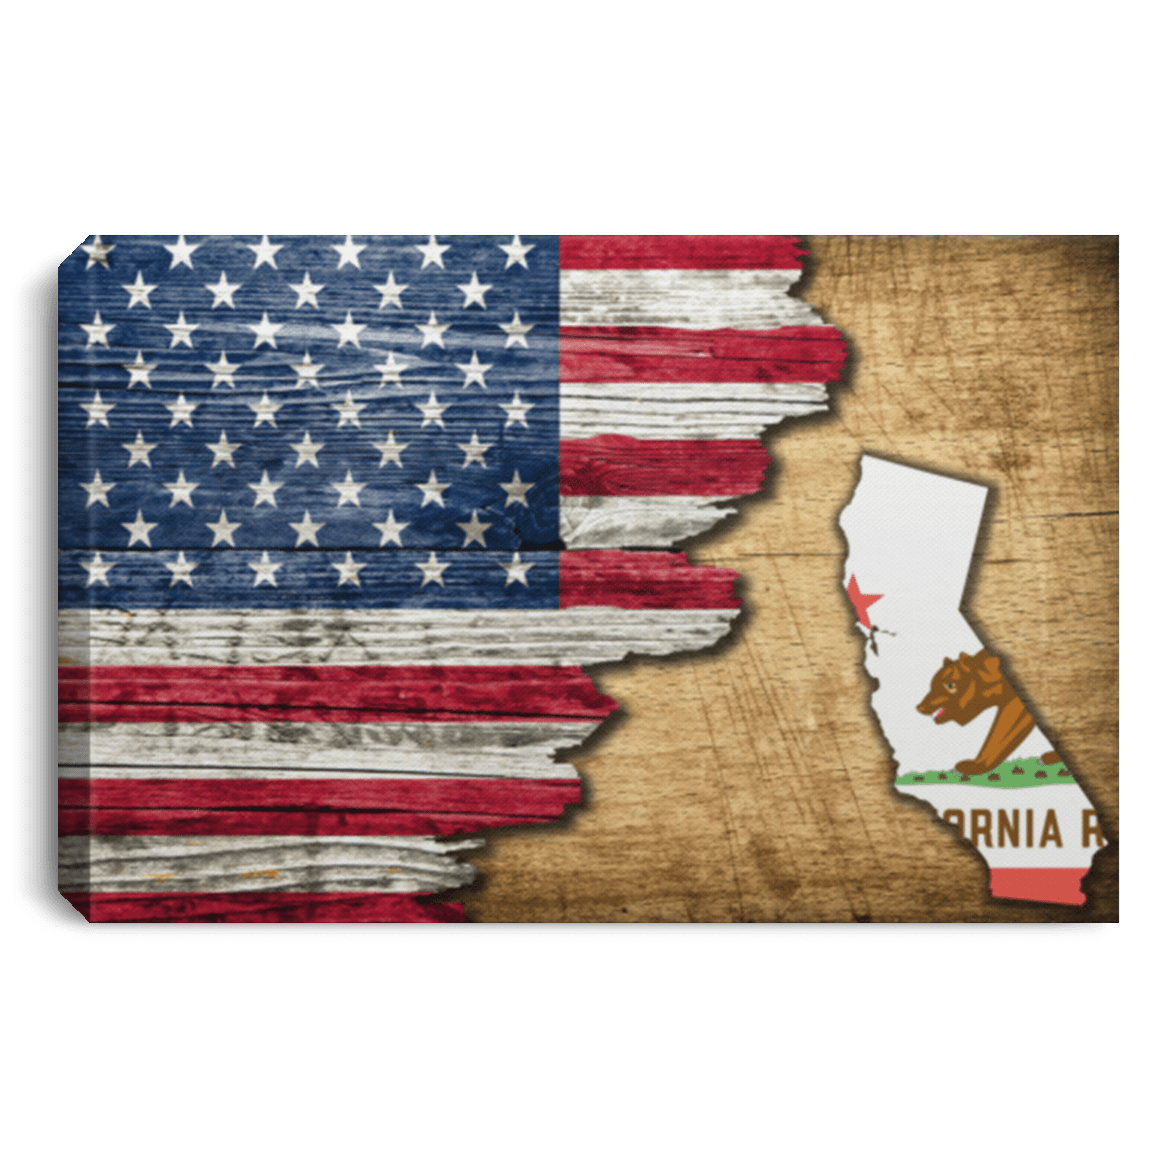 United States/California Flag Ripped Effect 18X12 Inches Landscape Canvas .75In Frame